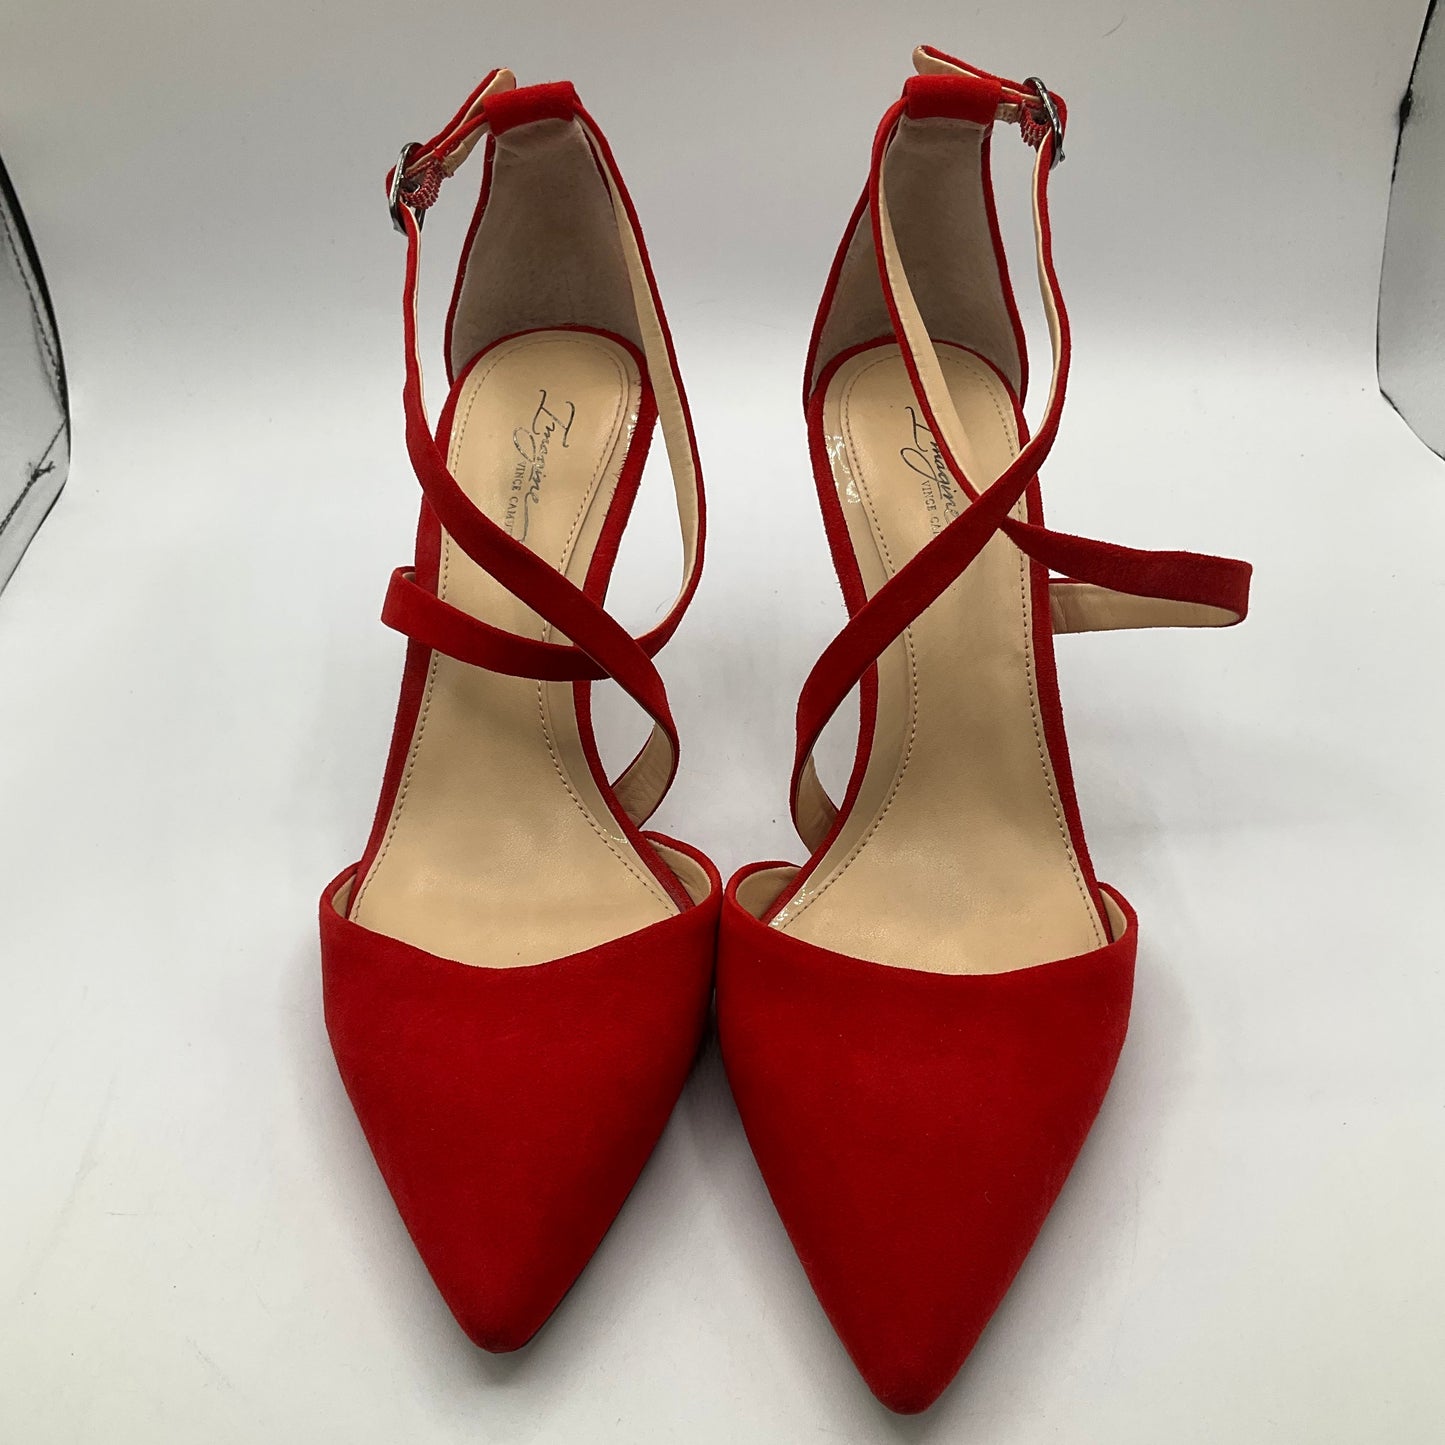 Red Shoes Heels Stiletto Vince Camuto, Size 10